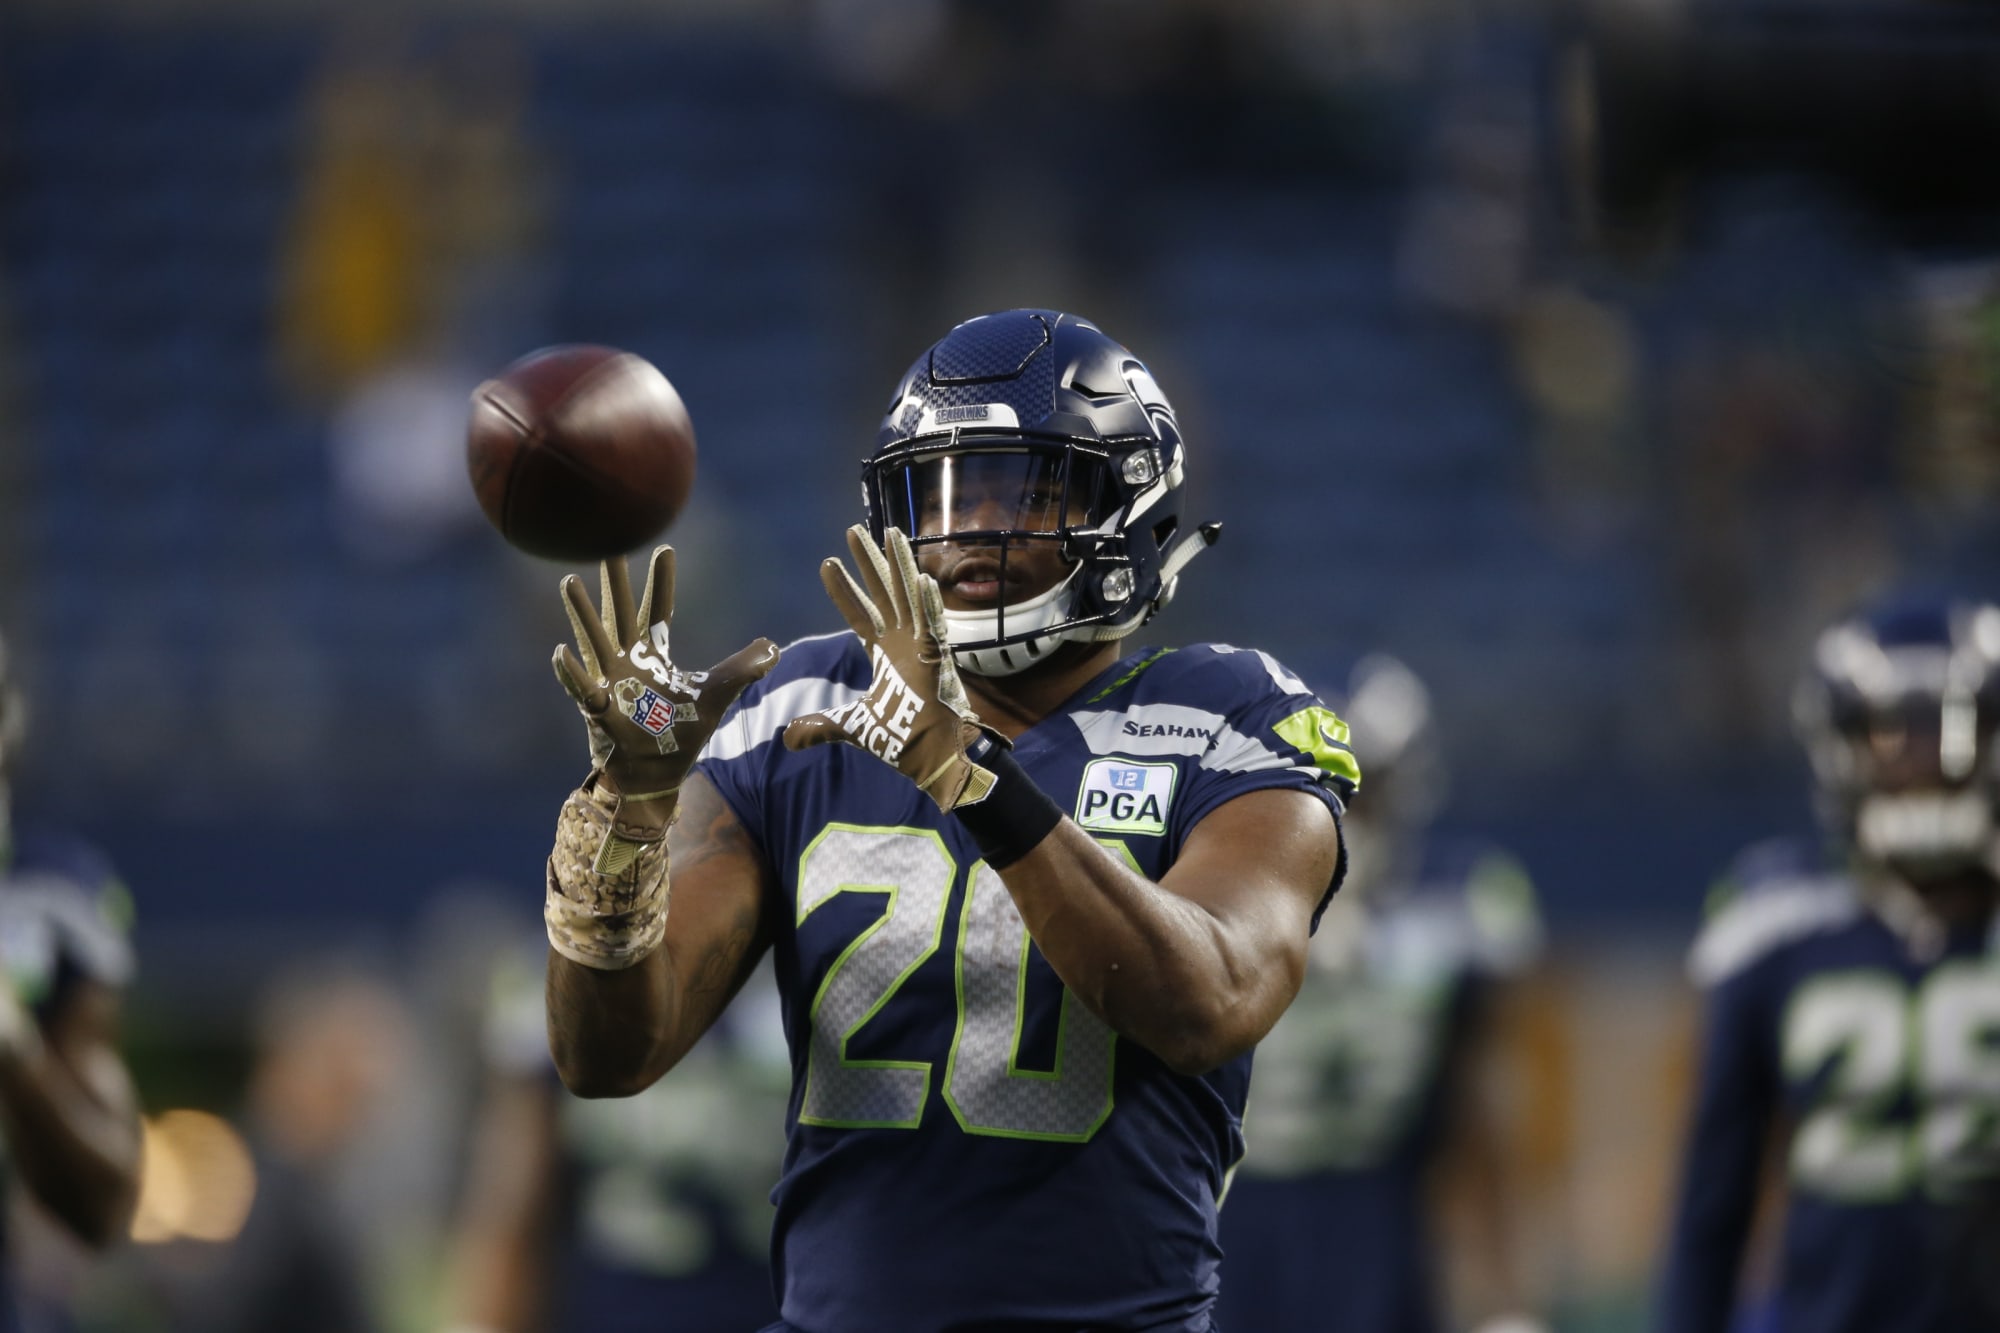 Seahawks running backs will be ready to run a lot of routes